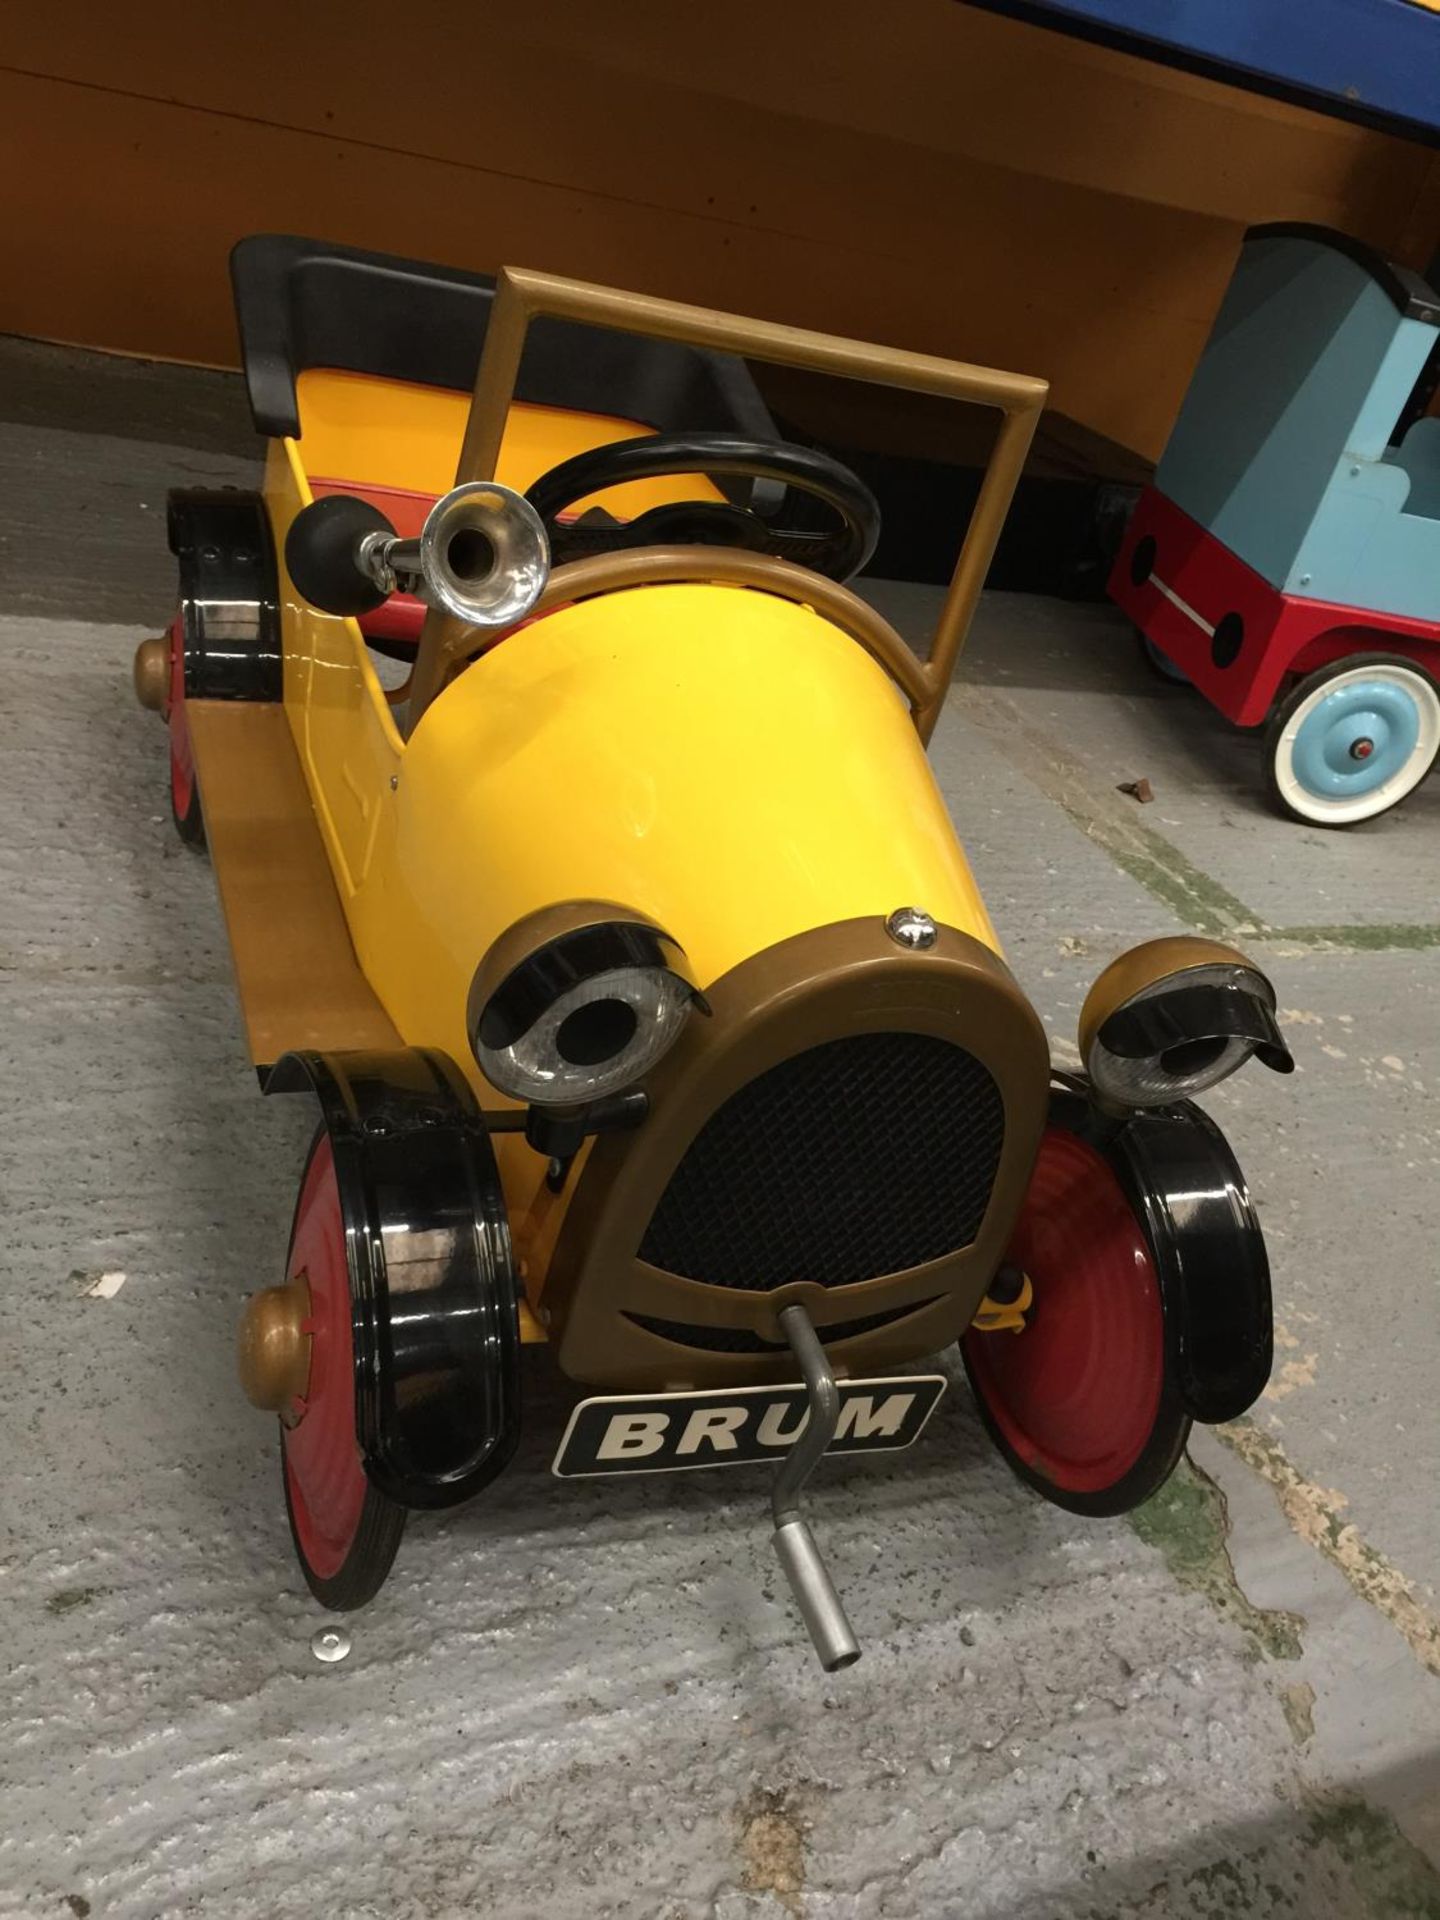 A BRUM PEDAL CAR WITH WORKING HORN AND CRANK HANDLE